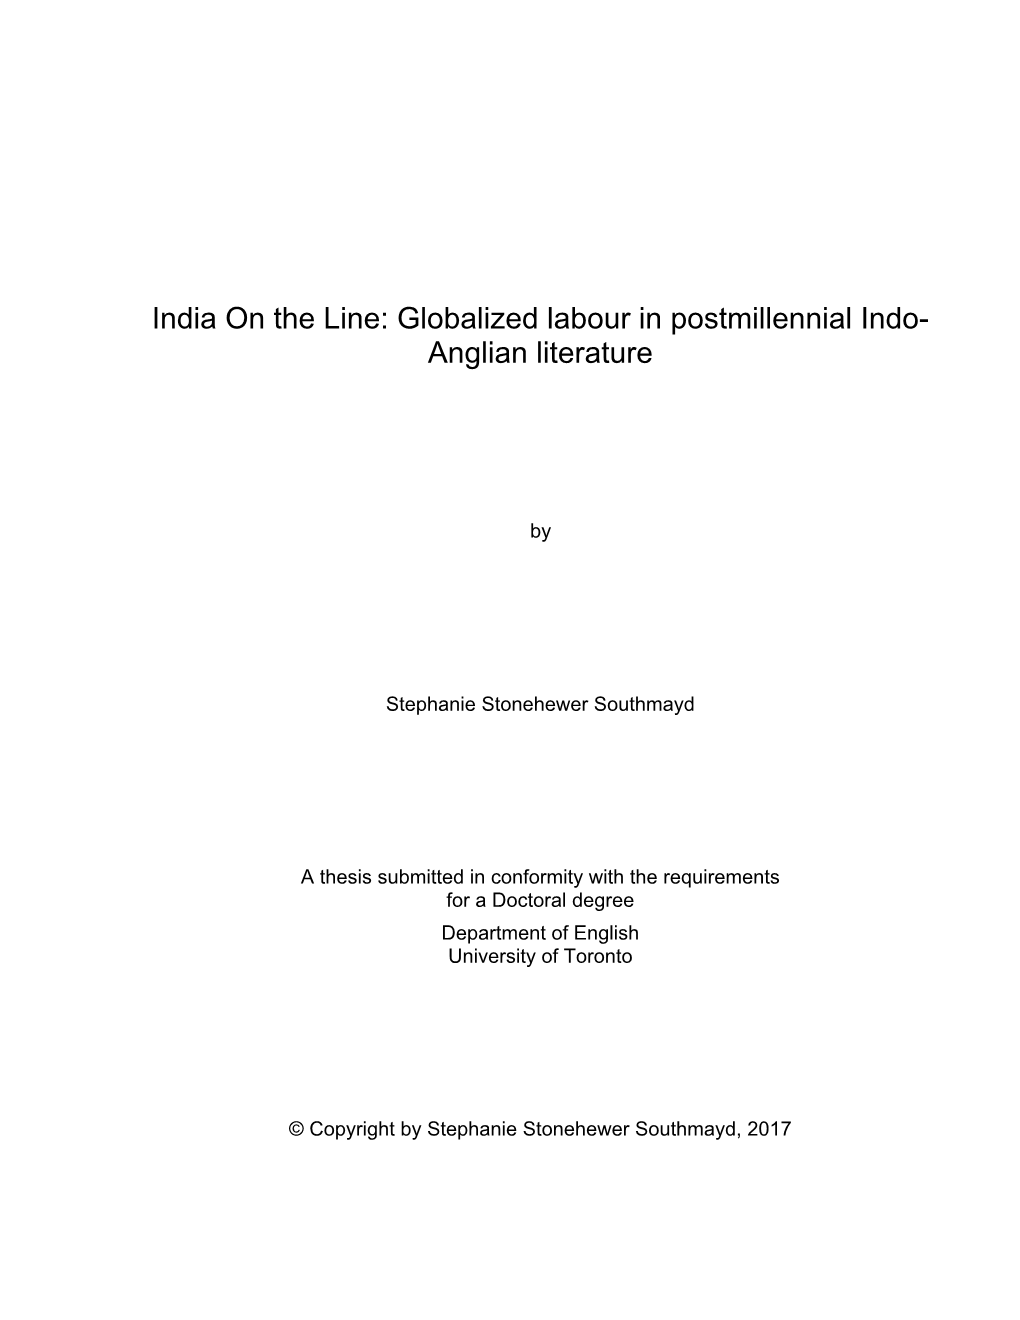 India on the Line: Globalized Labour in Postmillennial Indo- Anglian Literature